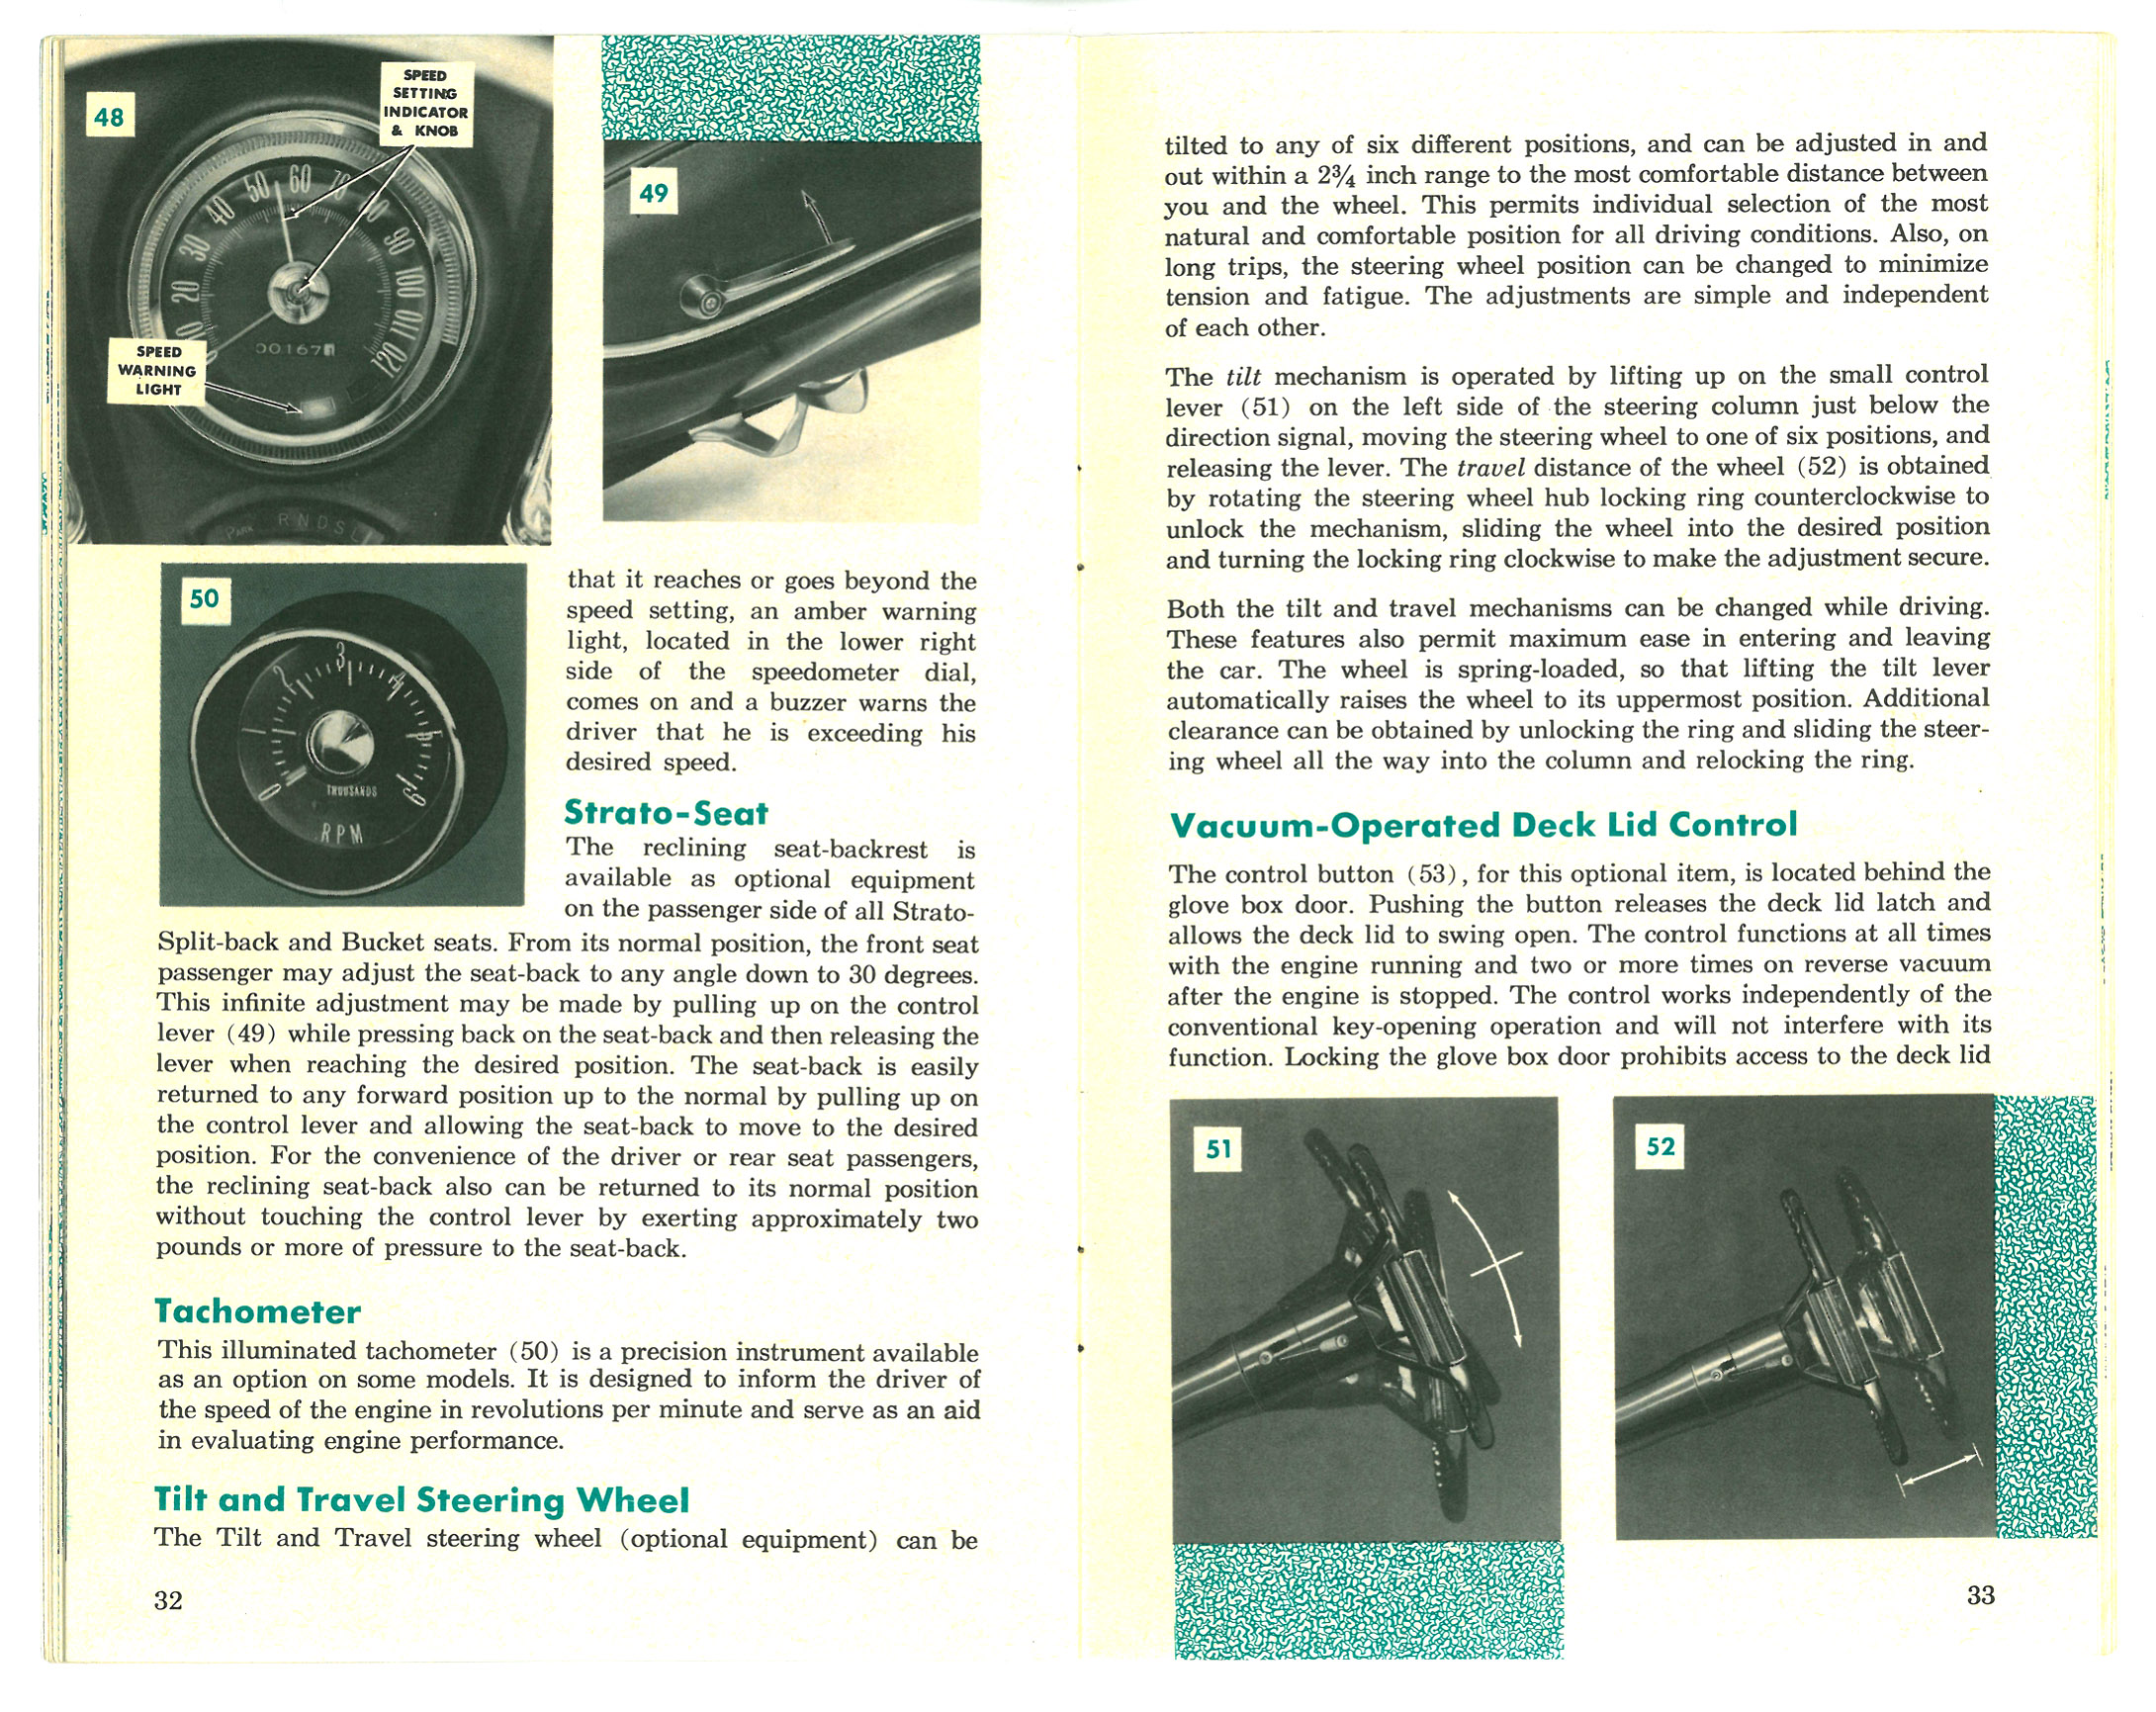 1966_Oldsmobile_owner_operating_manual_Page_18